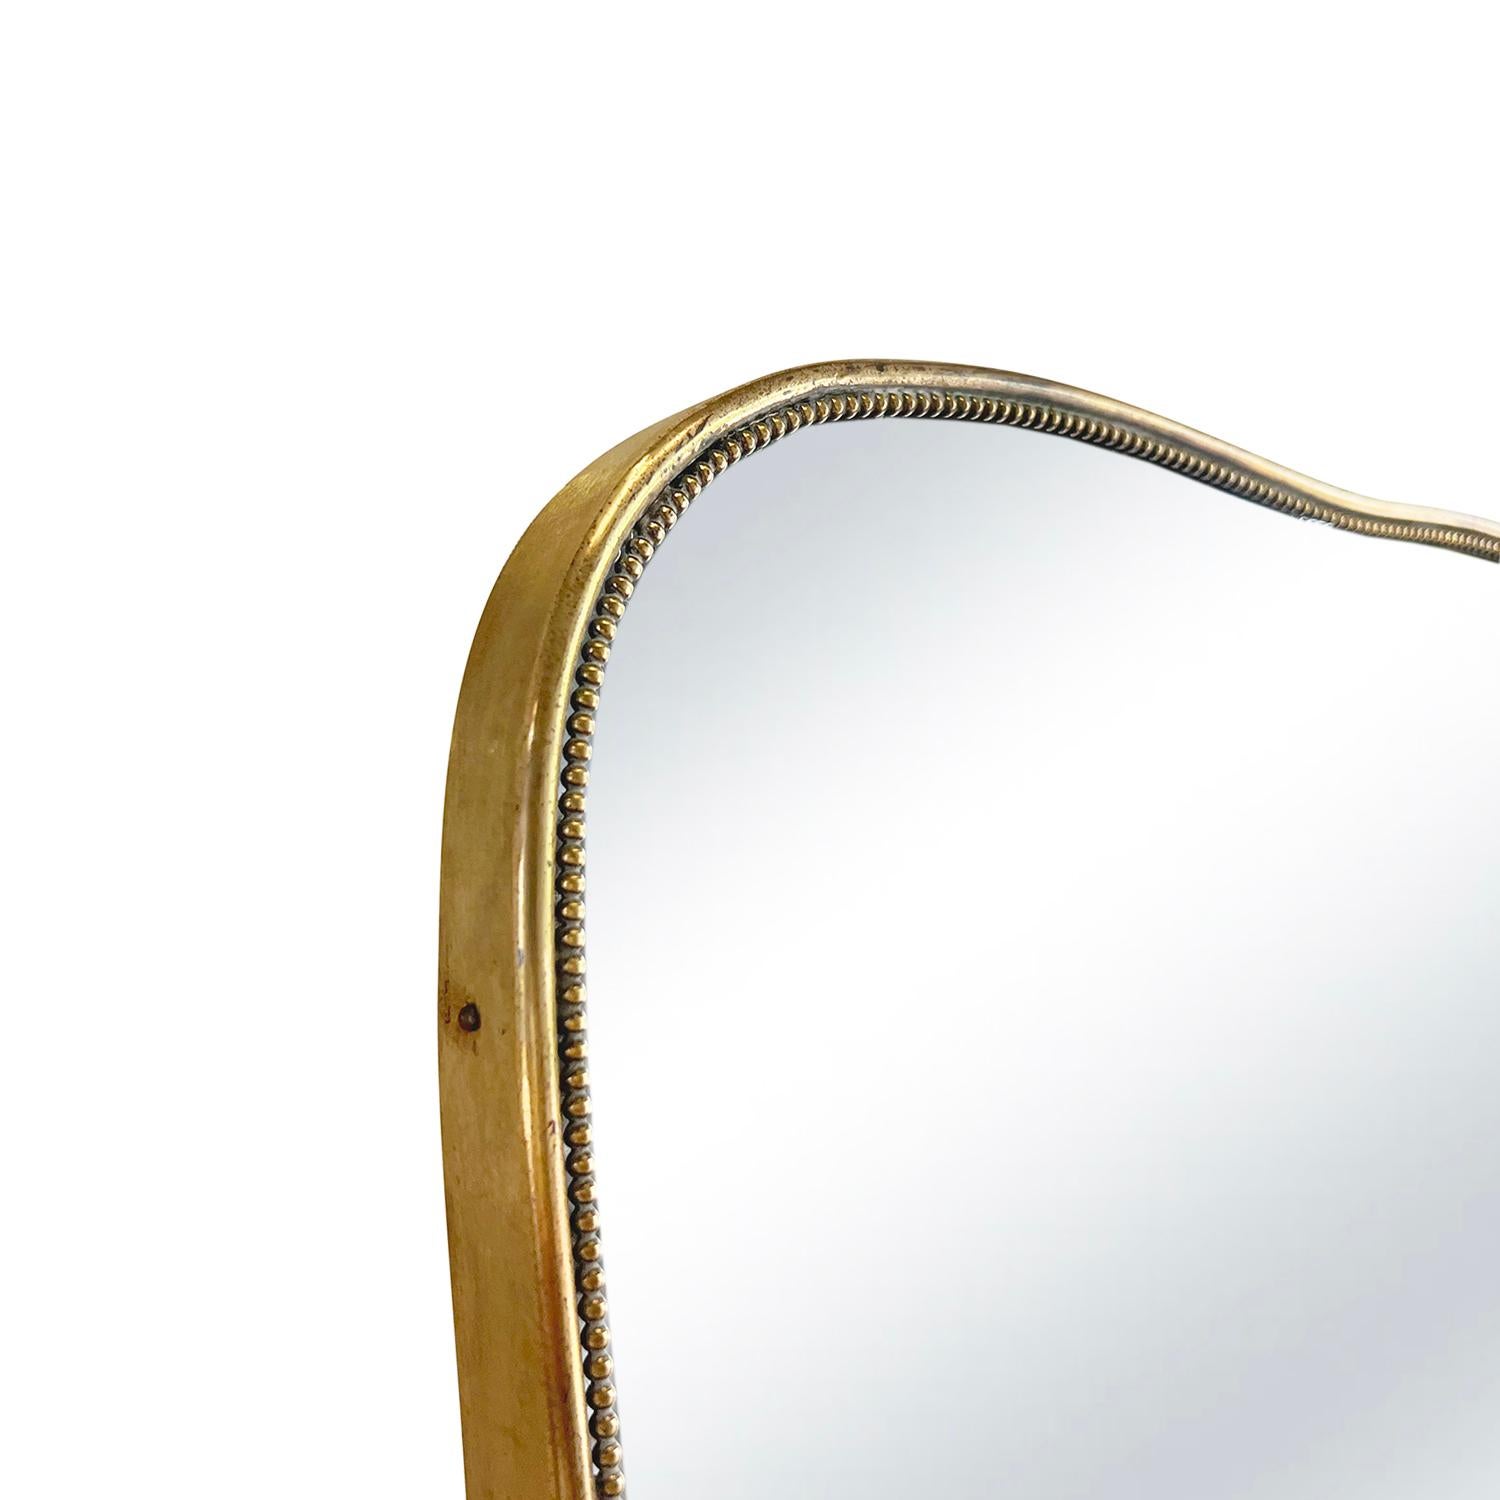 A vintage Mid-Century modern Italian wall mirror with gently arched rounded tops and bottoms, made of hand crafted polished brass in good condition. The modernist mirror is particularized by many round brass heads, consisting its original mirrored